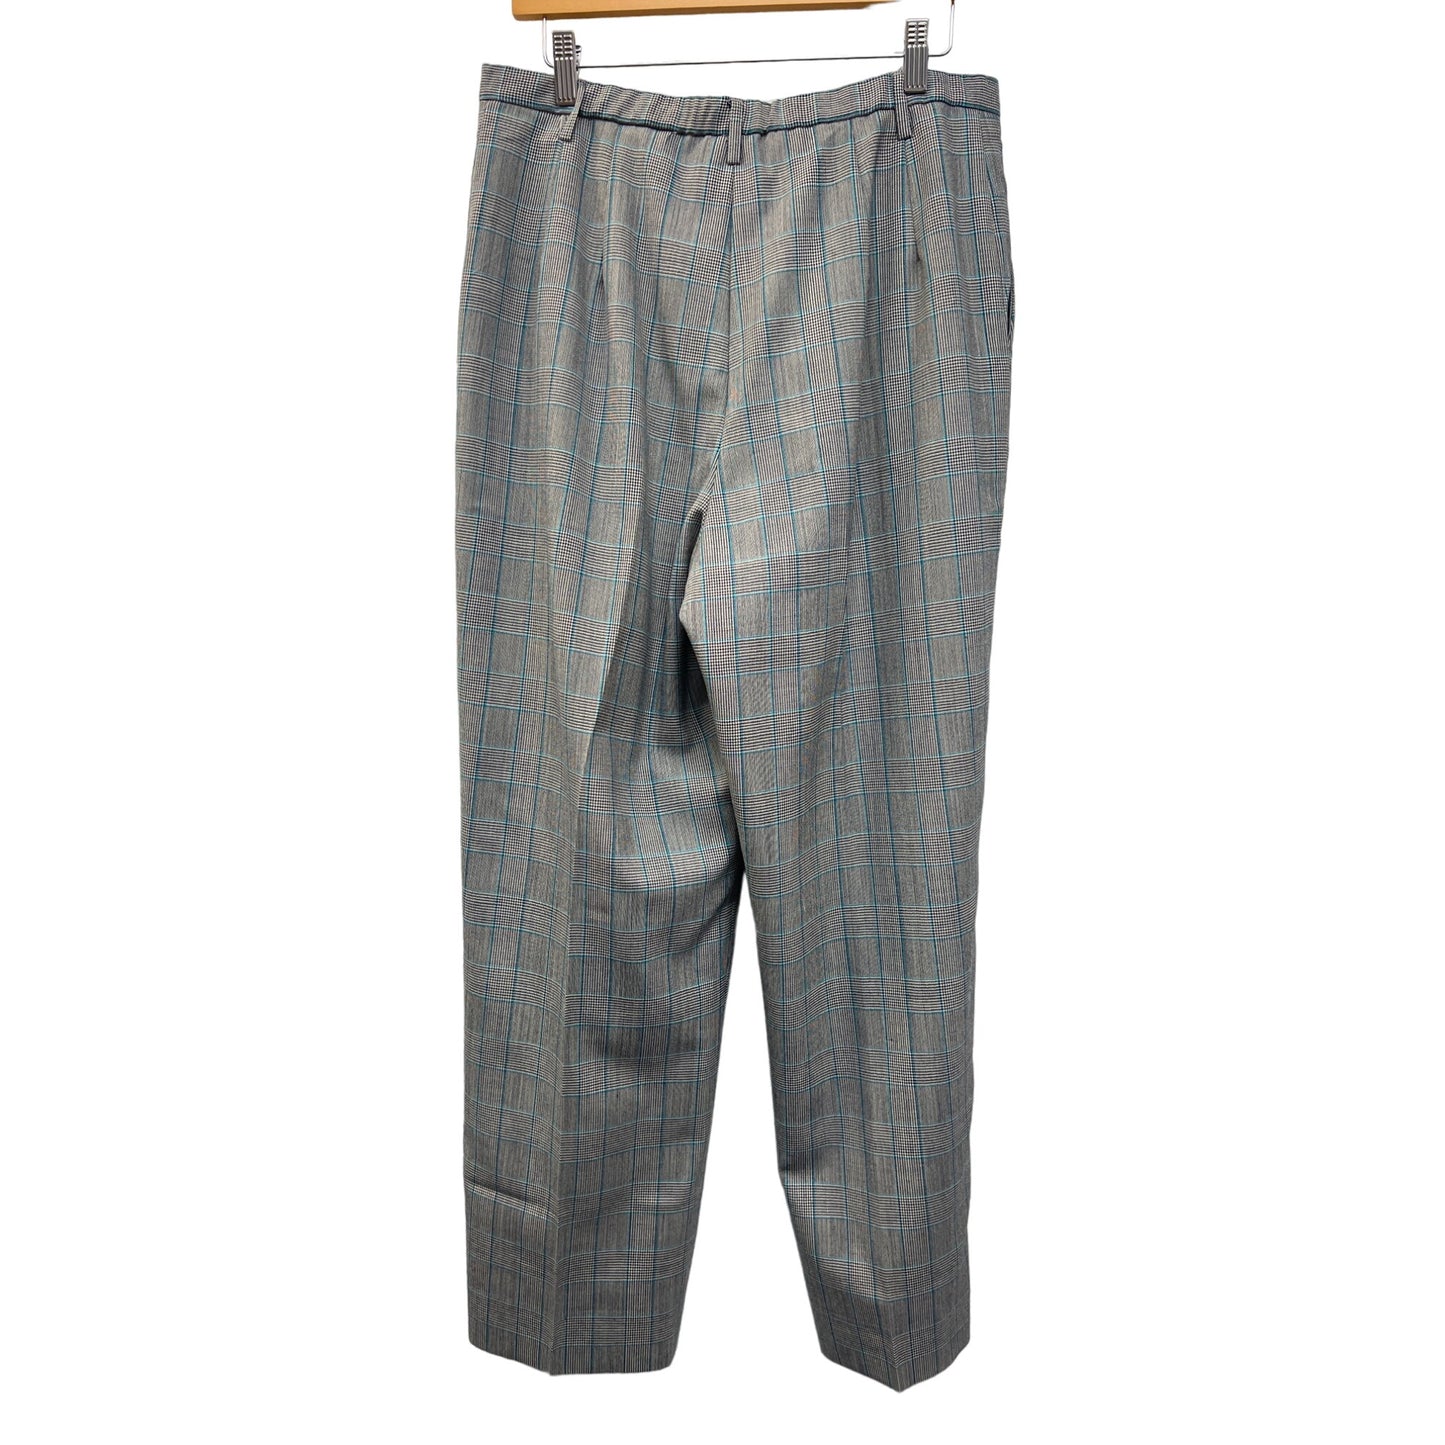 Pendleton Vintage Gray and Teal Plaid Wool Trousers